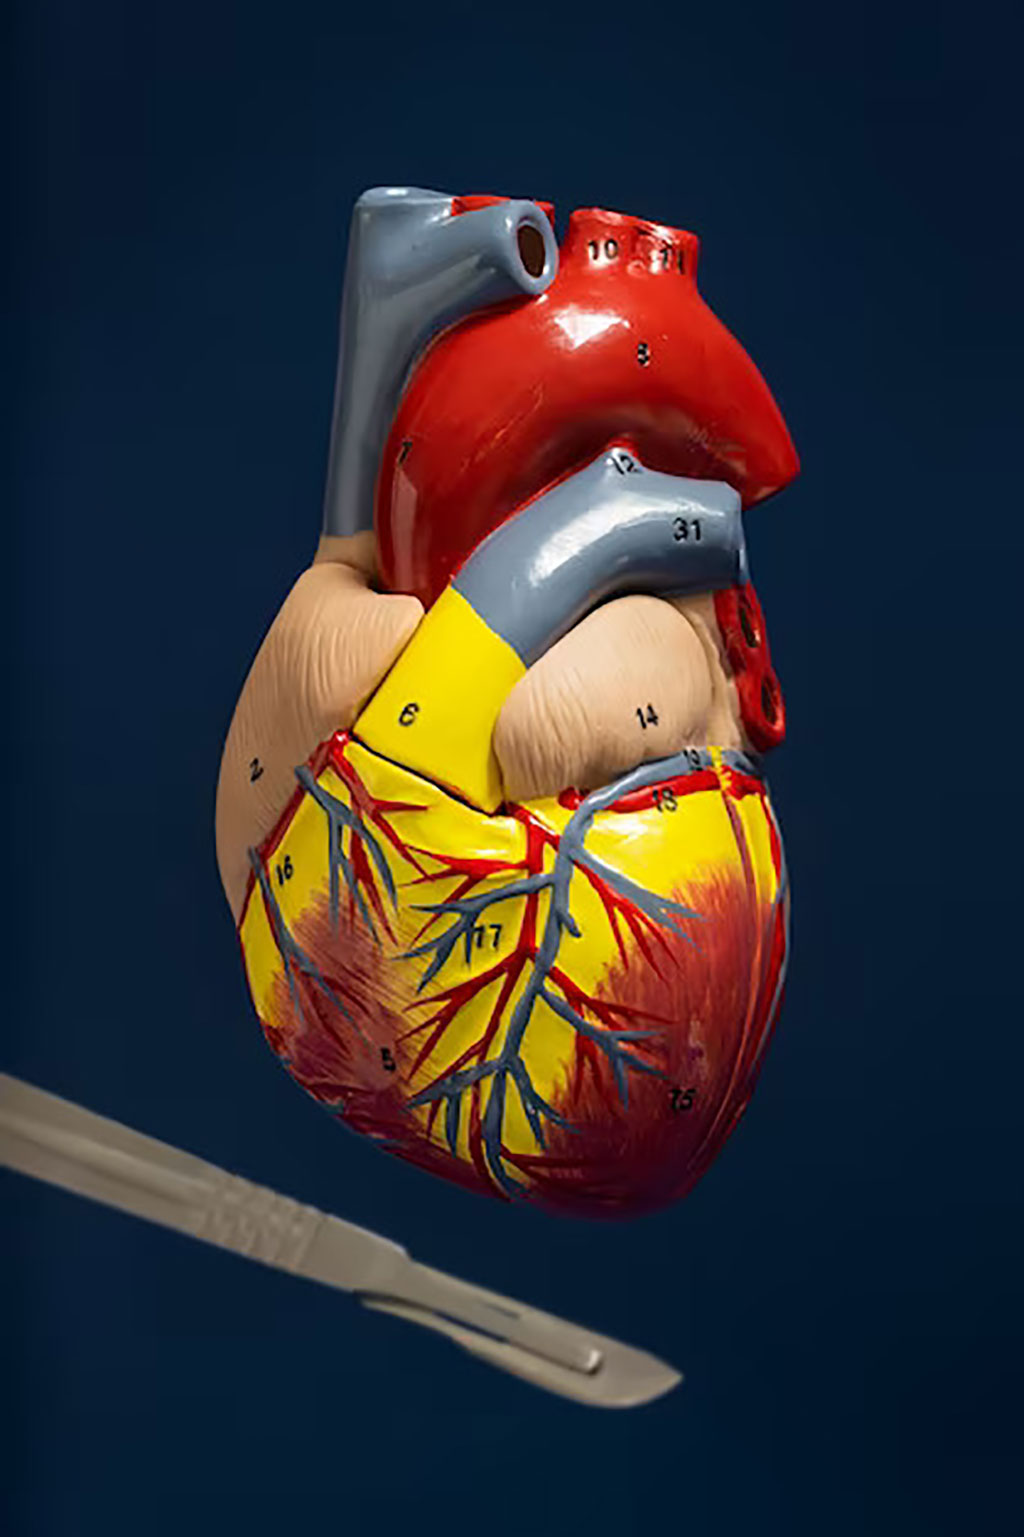 Image: The novel investigational device is designed to relieve pressure in the left side of heart (Photo courtesy of Freepik)